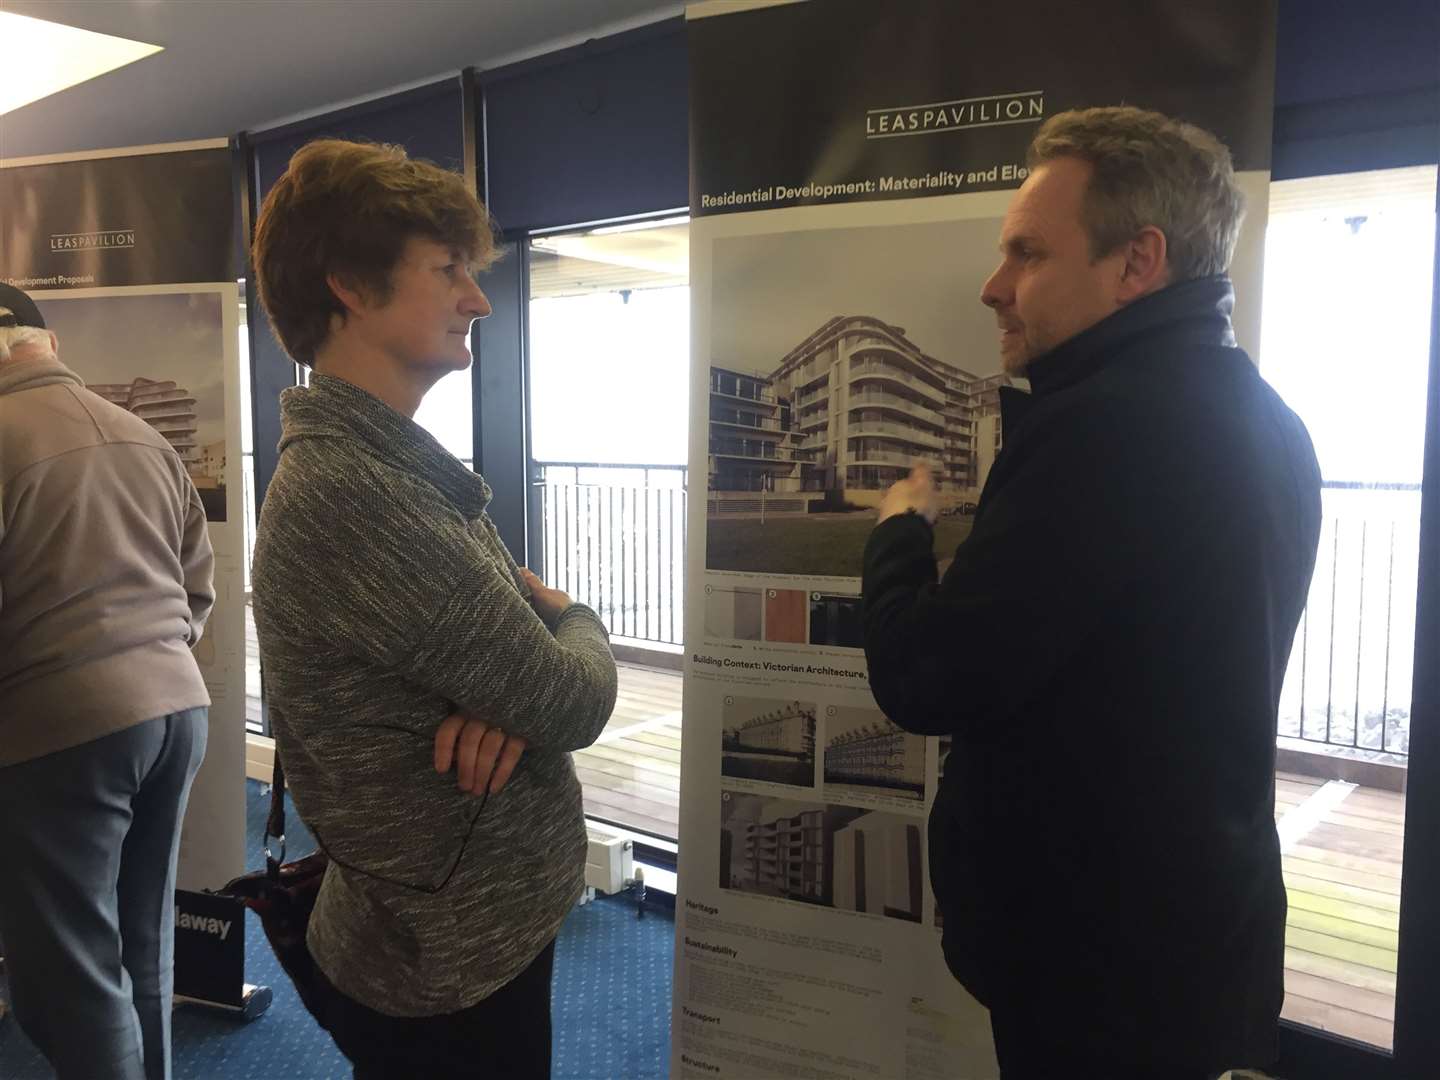 Cllr Lesley Whybrow, from Folkestone and Hythe District Council with architect Guy Hollaway at the public consultation